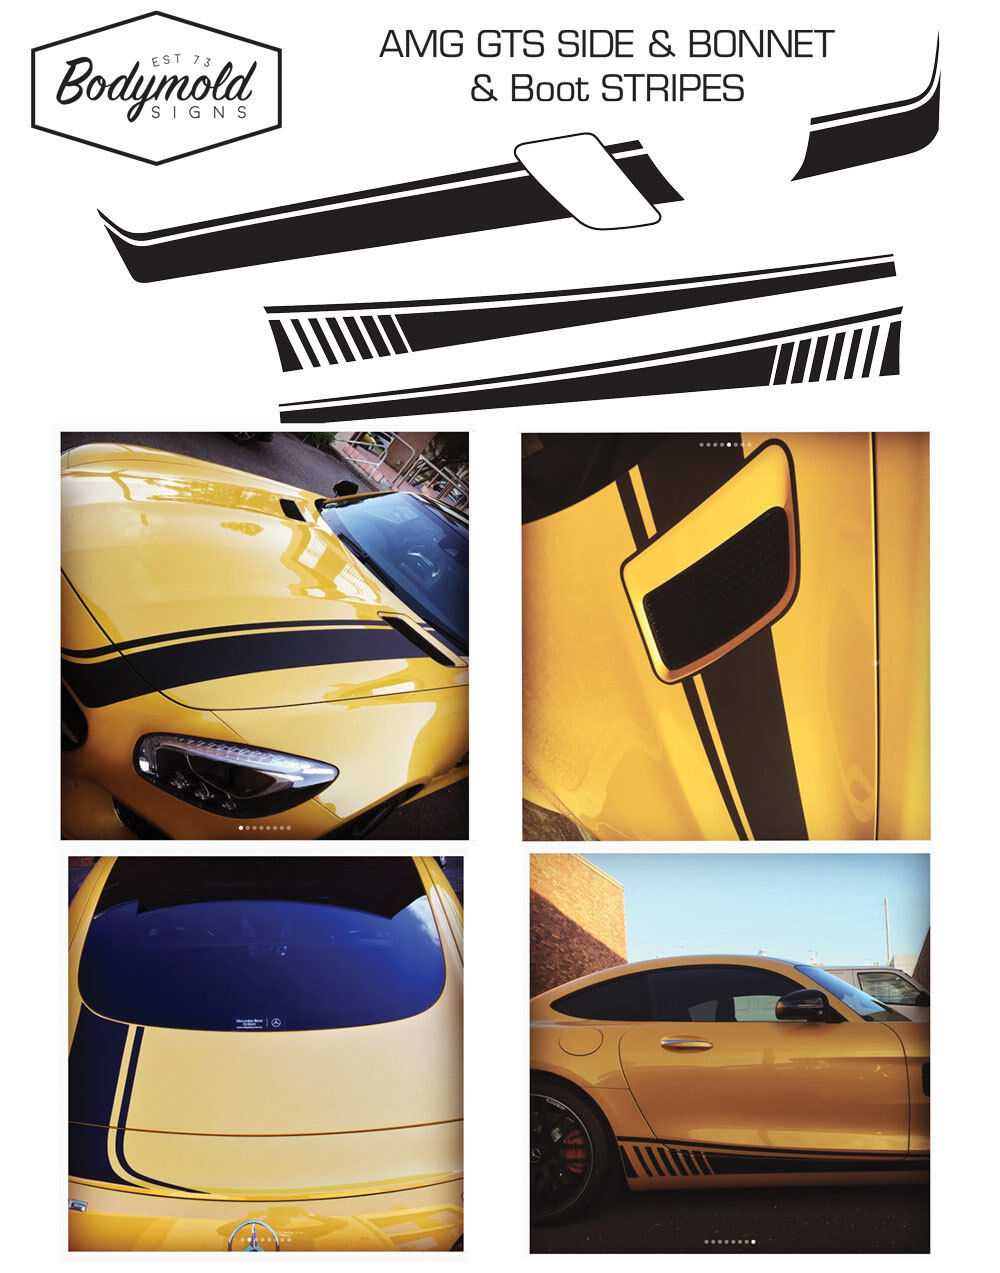 Mercedes AMG GTS Custom Bonnet and Boot decal set with side stripes 